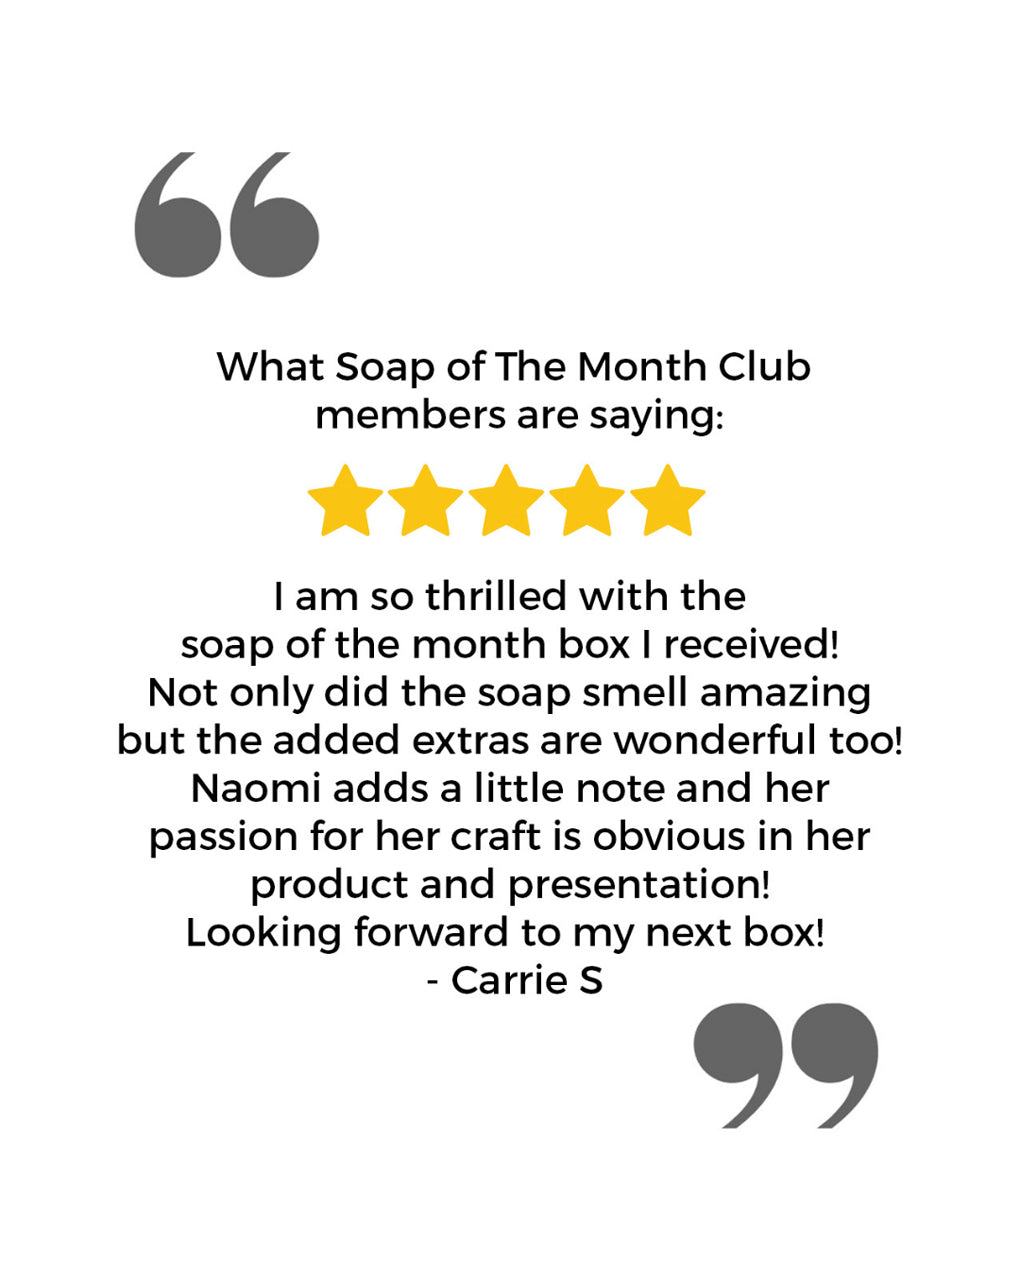 Soap of The Month Club